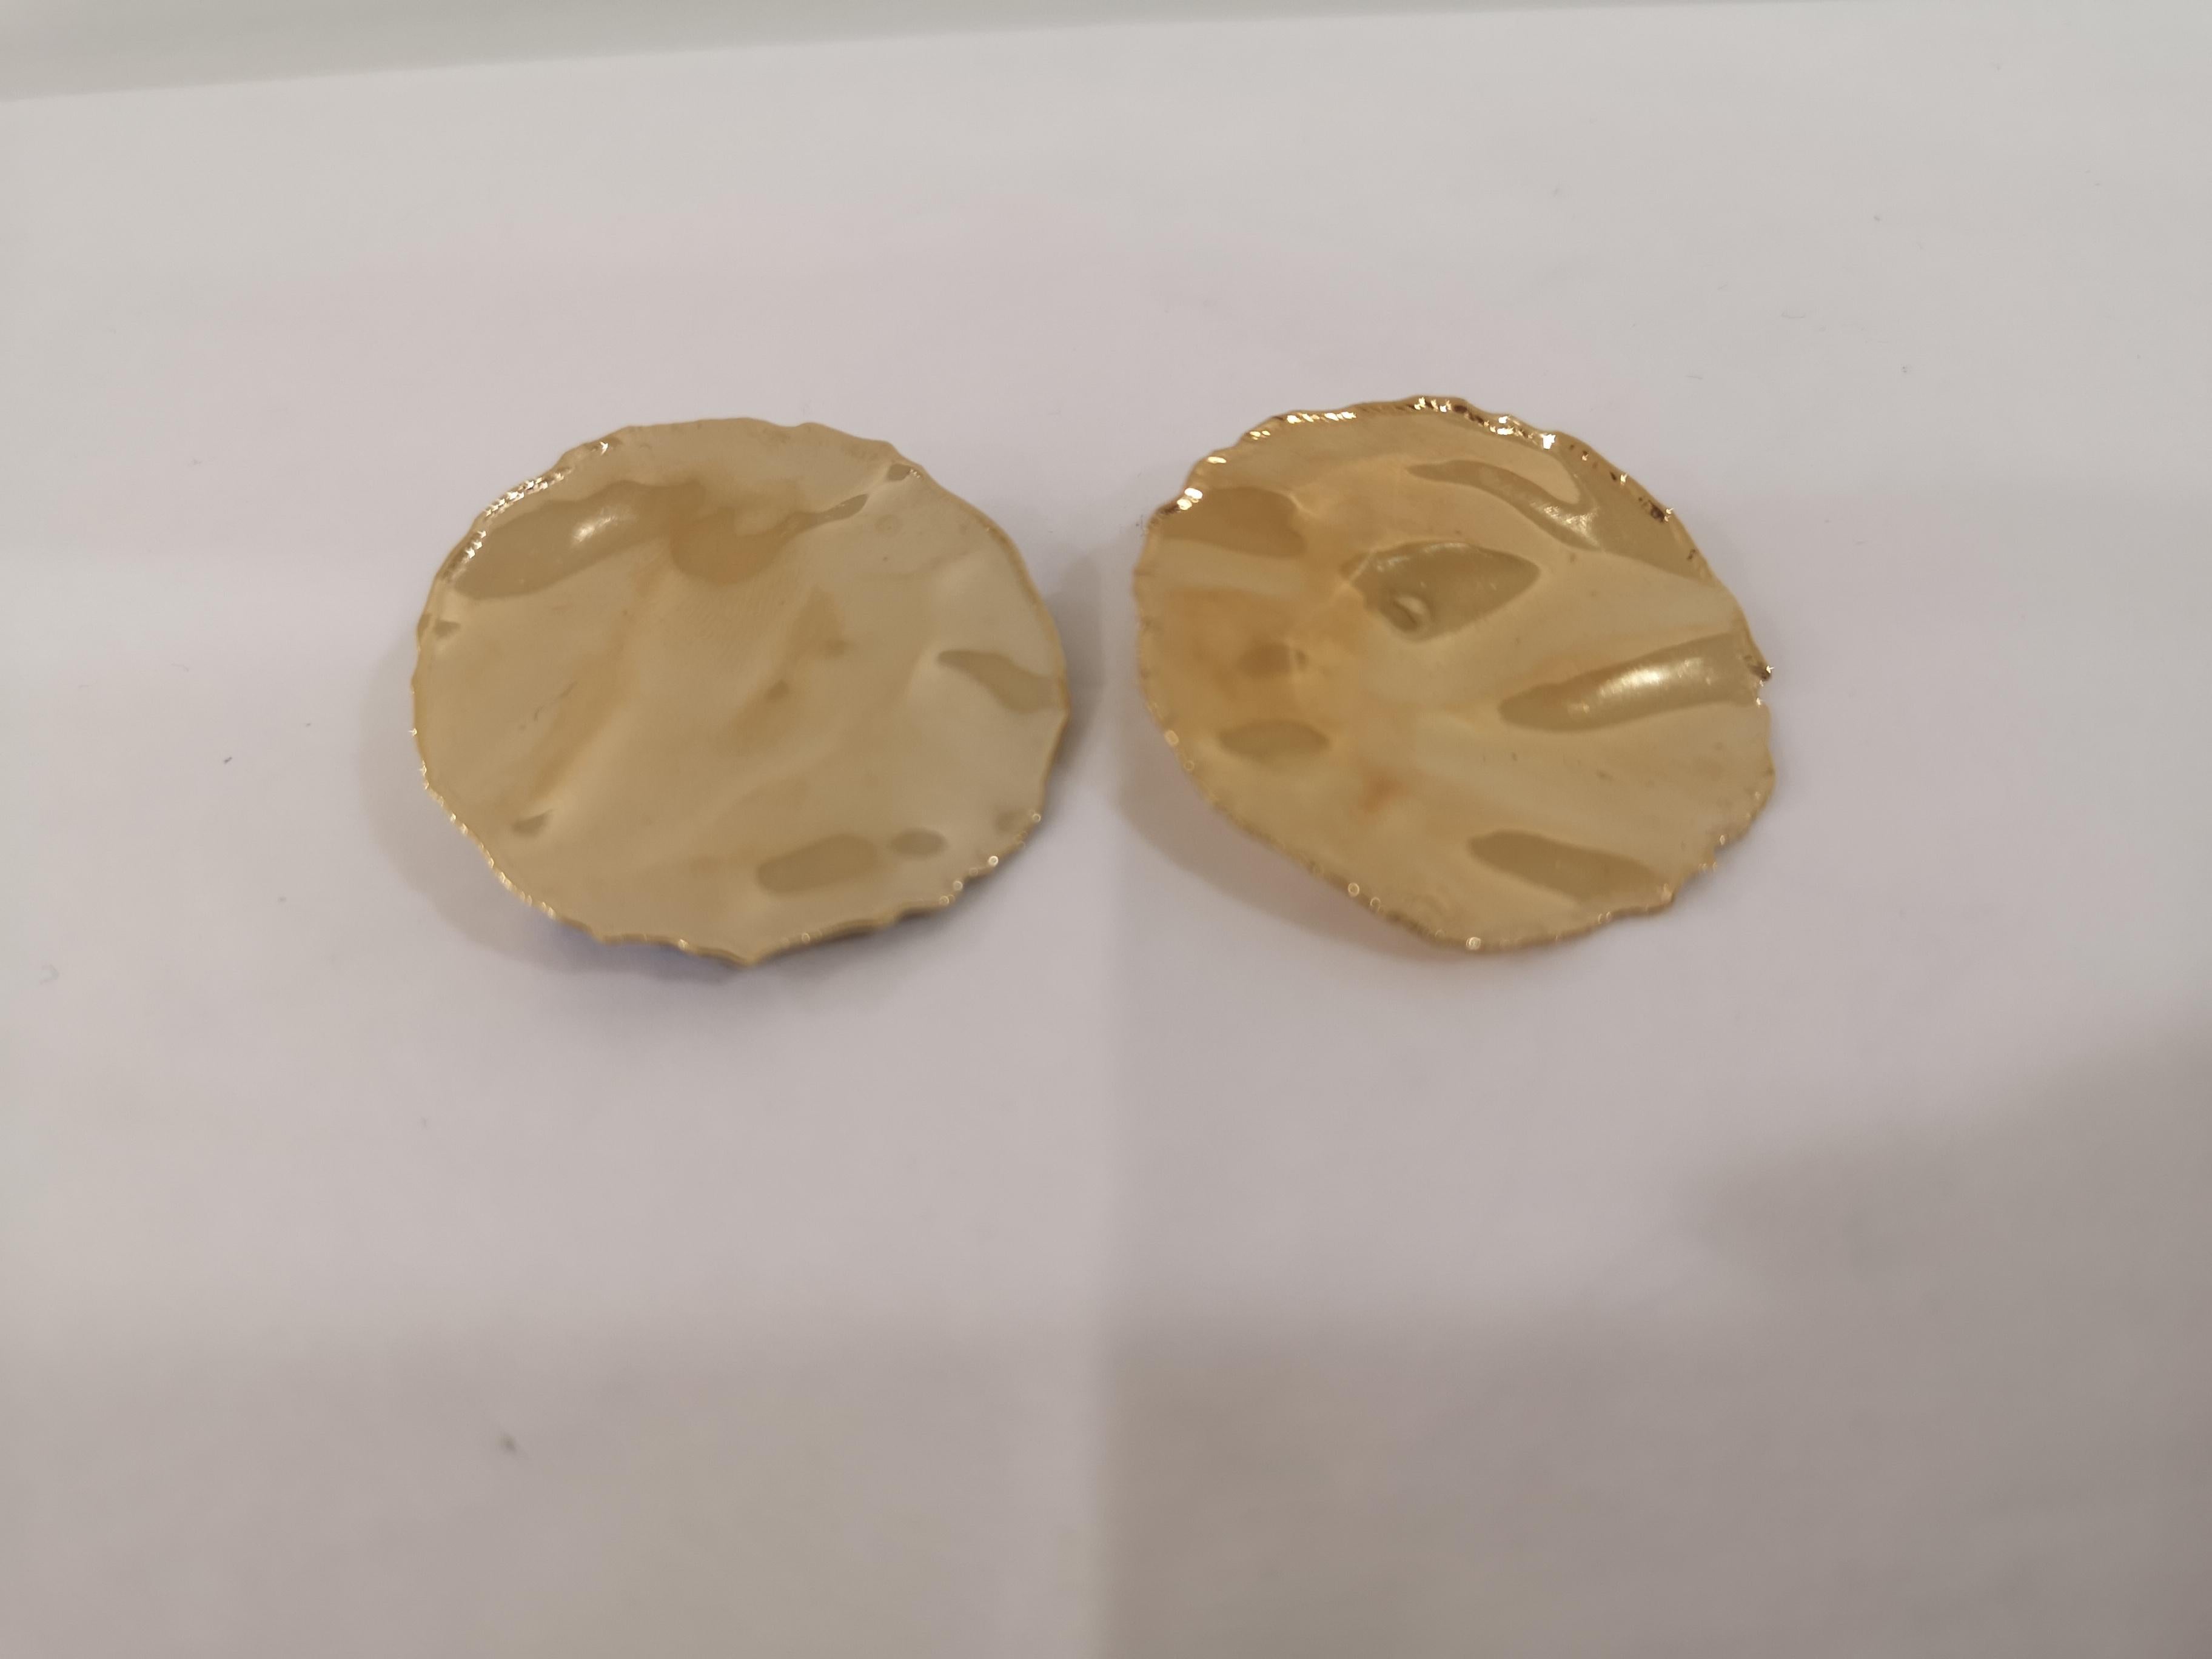 Lucedeimieiocchi gold silver boutons earrings
totally handmade in italy